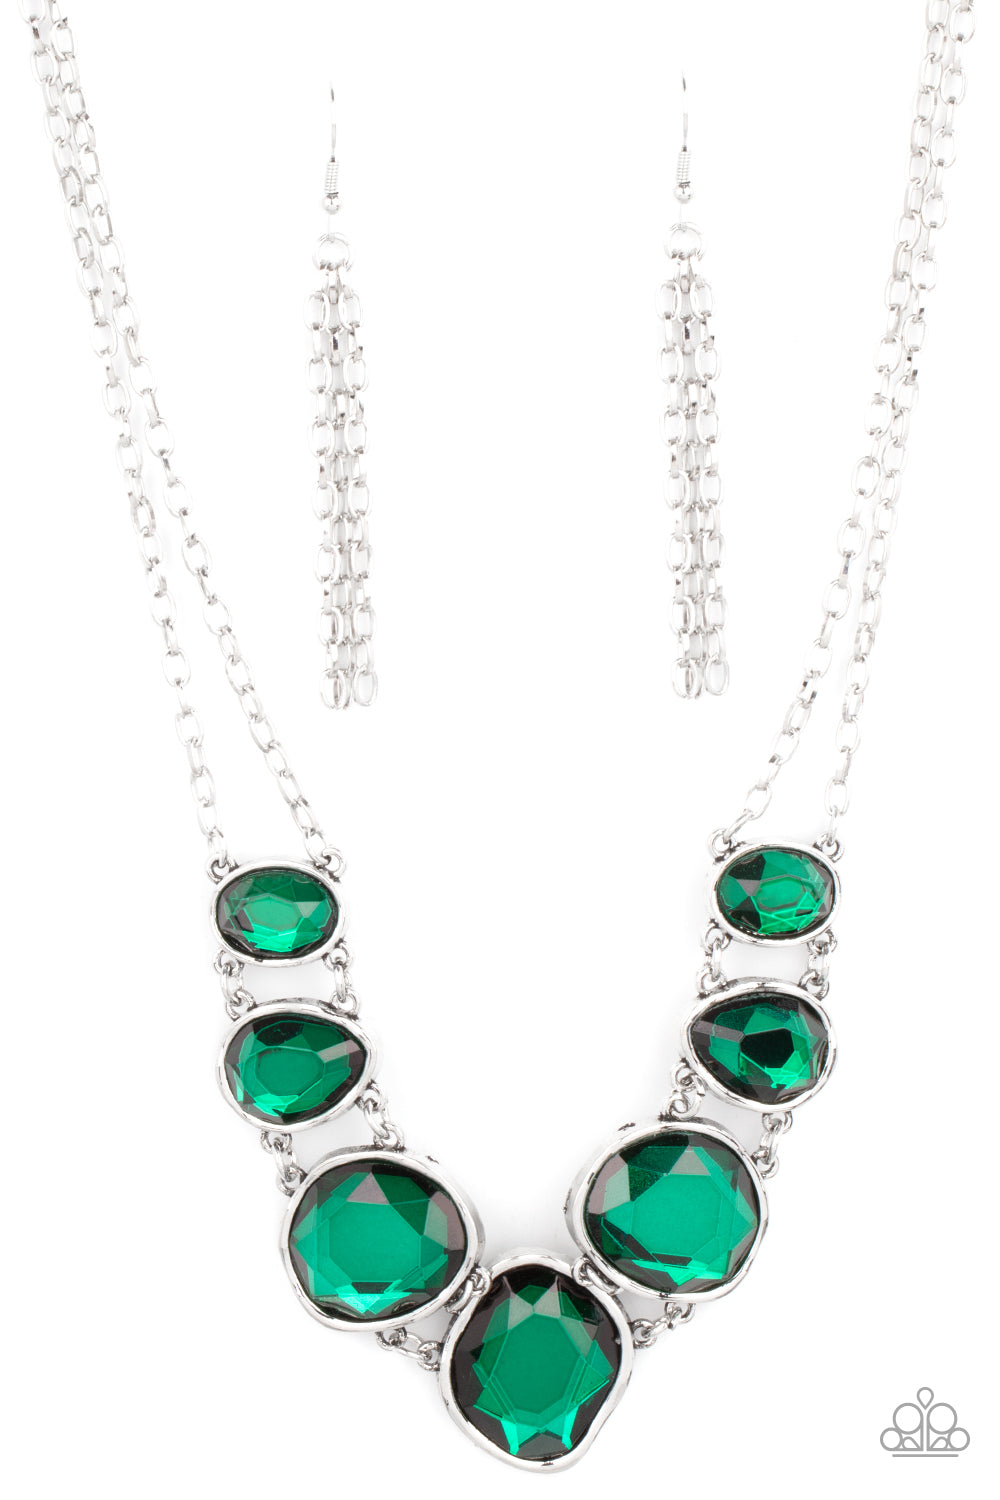 Absolute Admiration - Green Rhinestone Necklaces encased in hammered asymmetrical silver frames, an imperfect collection of faceted green gems are suspended from two shimmery silver chains as they double-link below the collar for a dramatic effect. Features an adjustable clasp closure.  Sold as one individual necklace. Includes one pair of matching earrings.